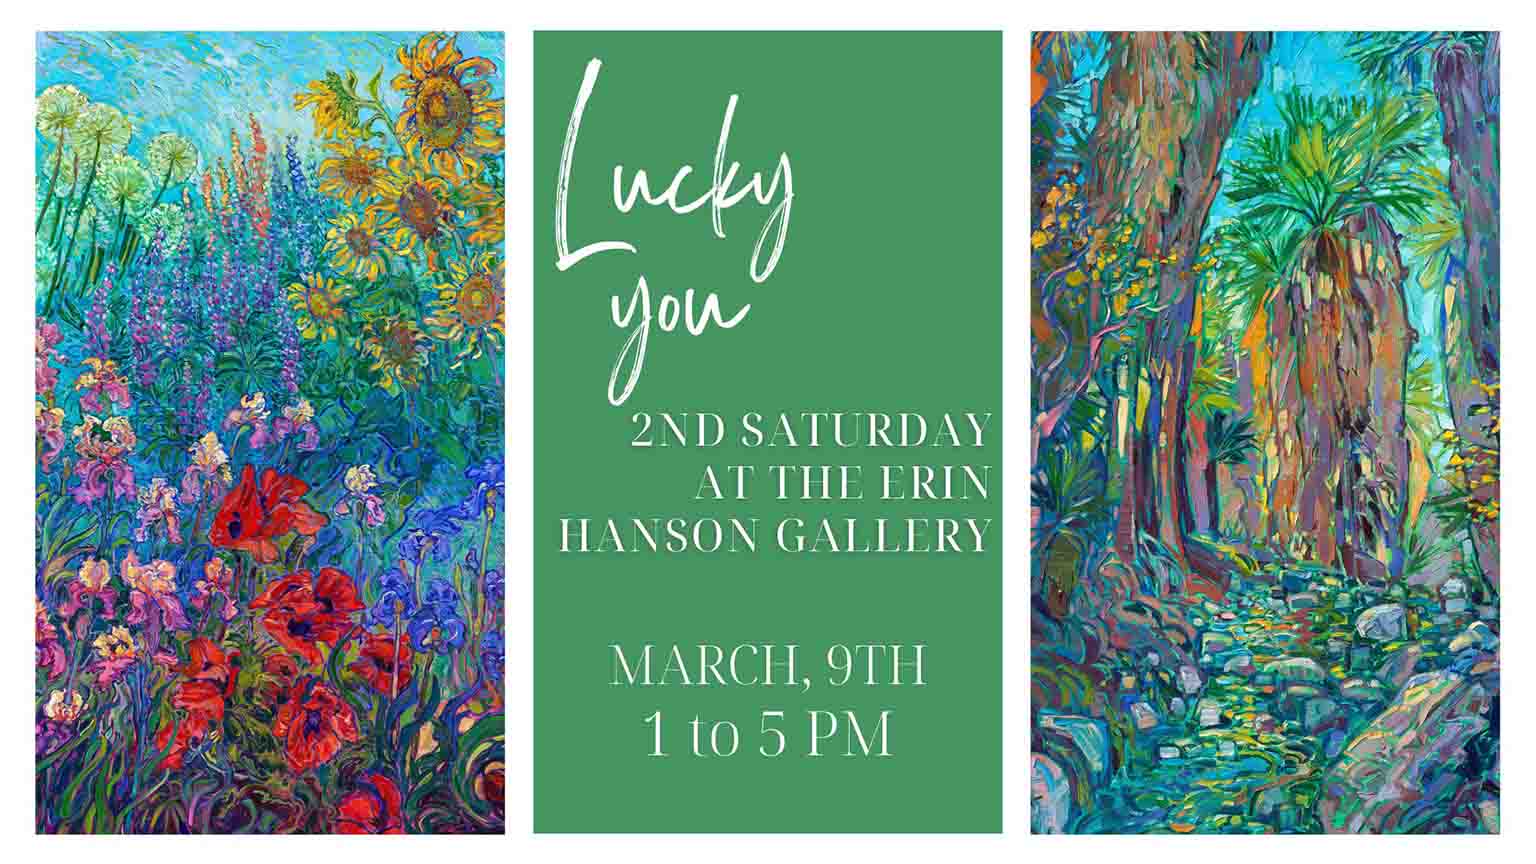 Lucky You, 2nd Saturday at The Erin Hanson Gallery - Keep It Local Mac